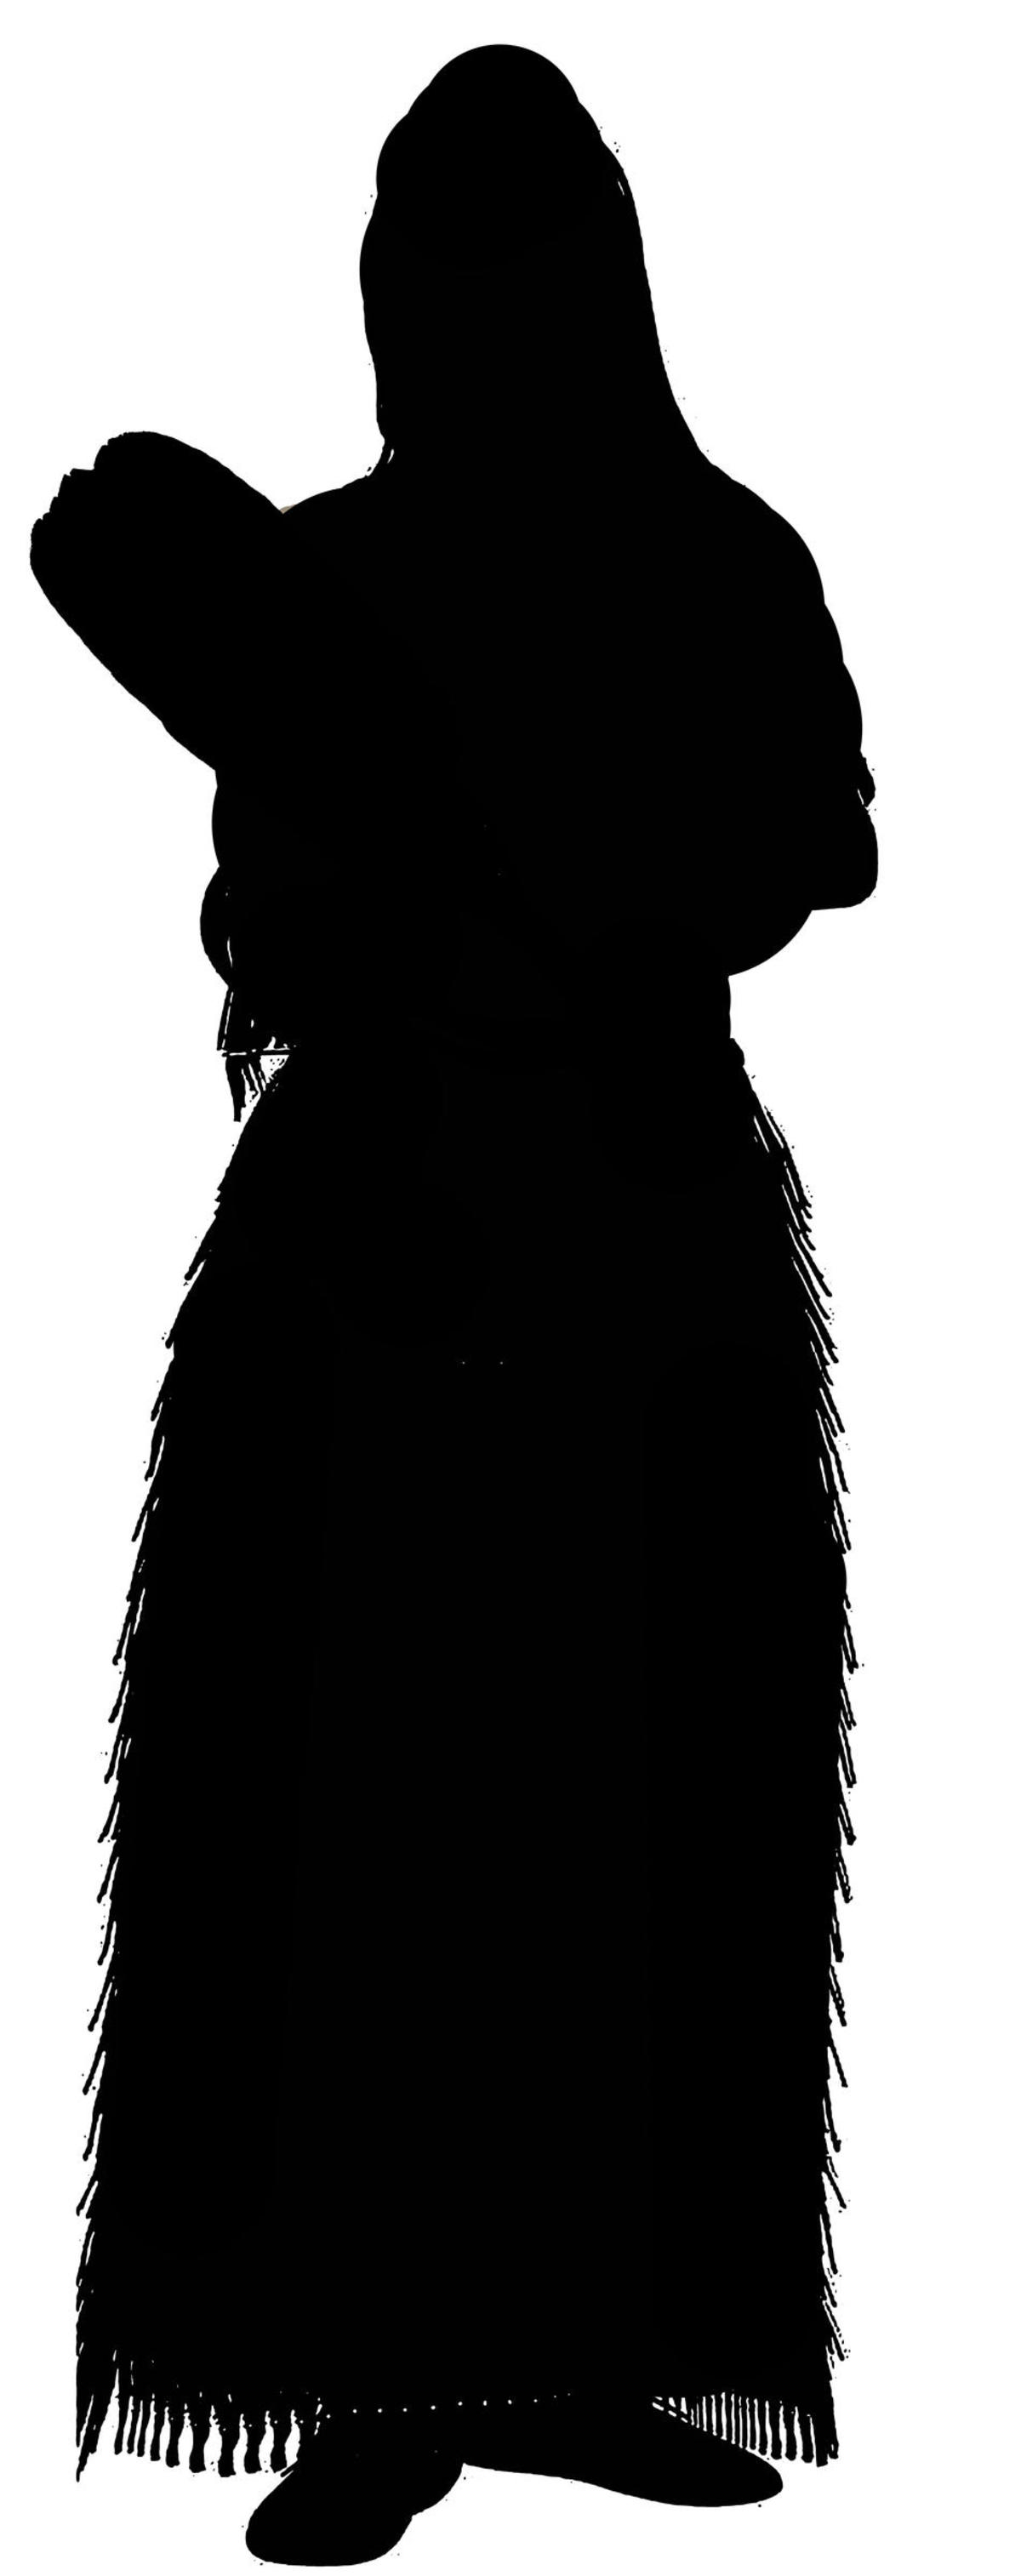 Silhouette of a Native woman in traditional clothing holding an infant in her arms